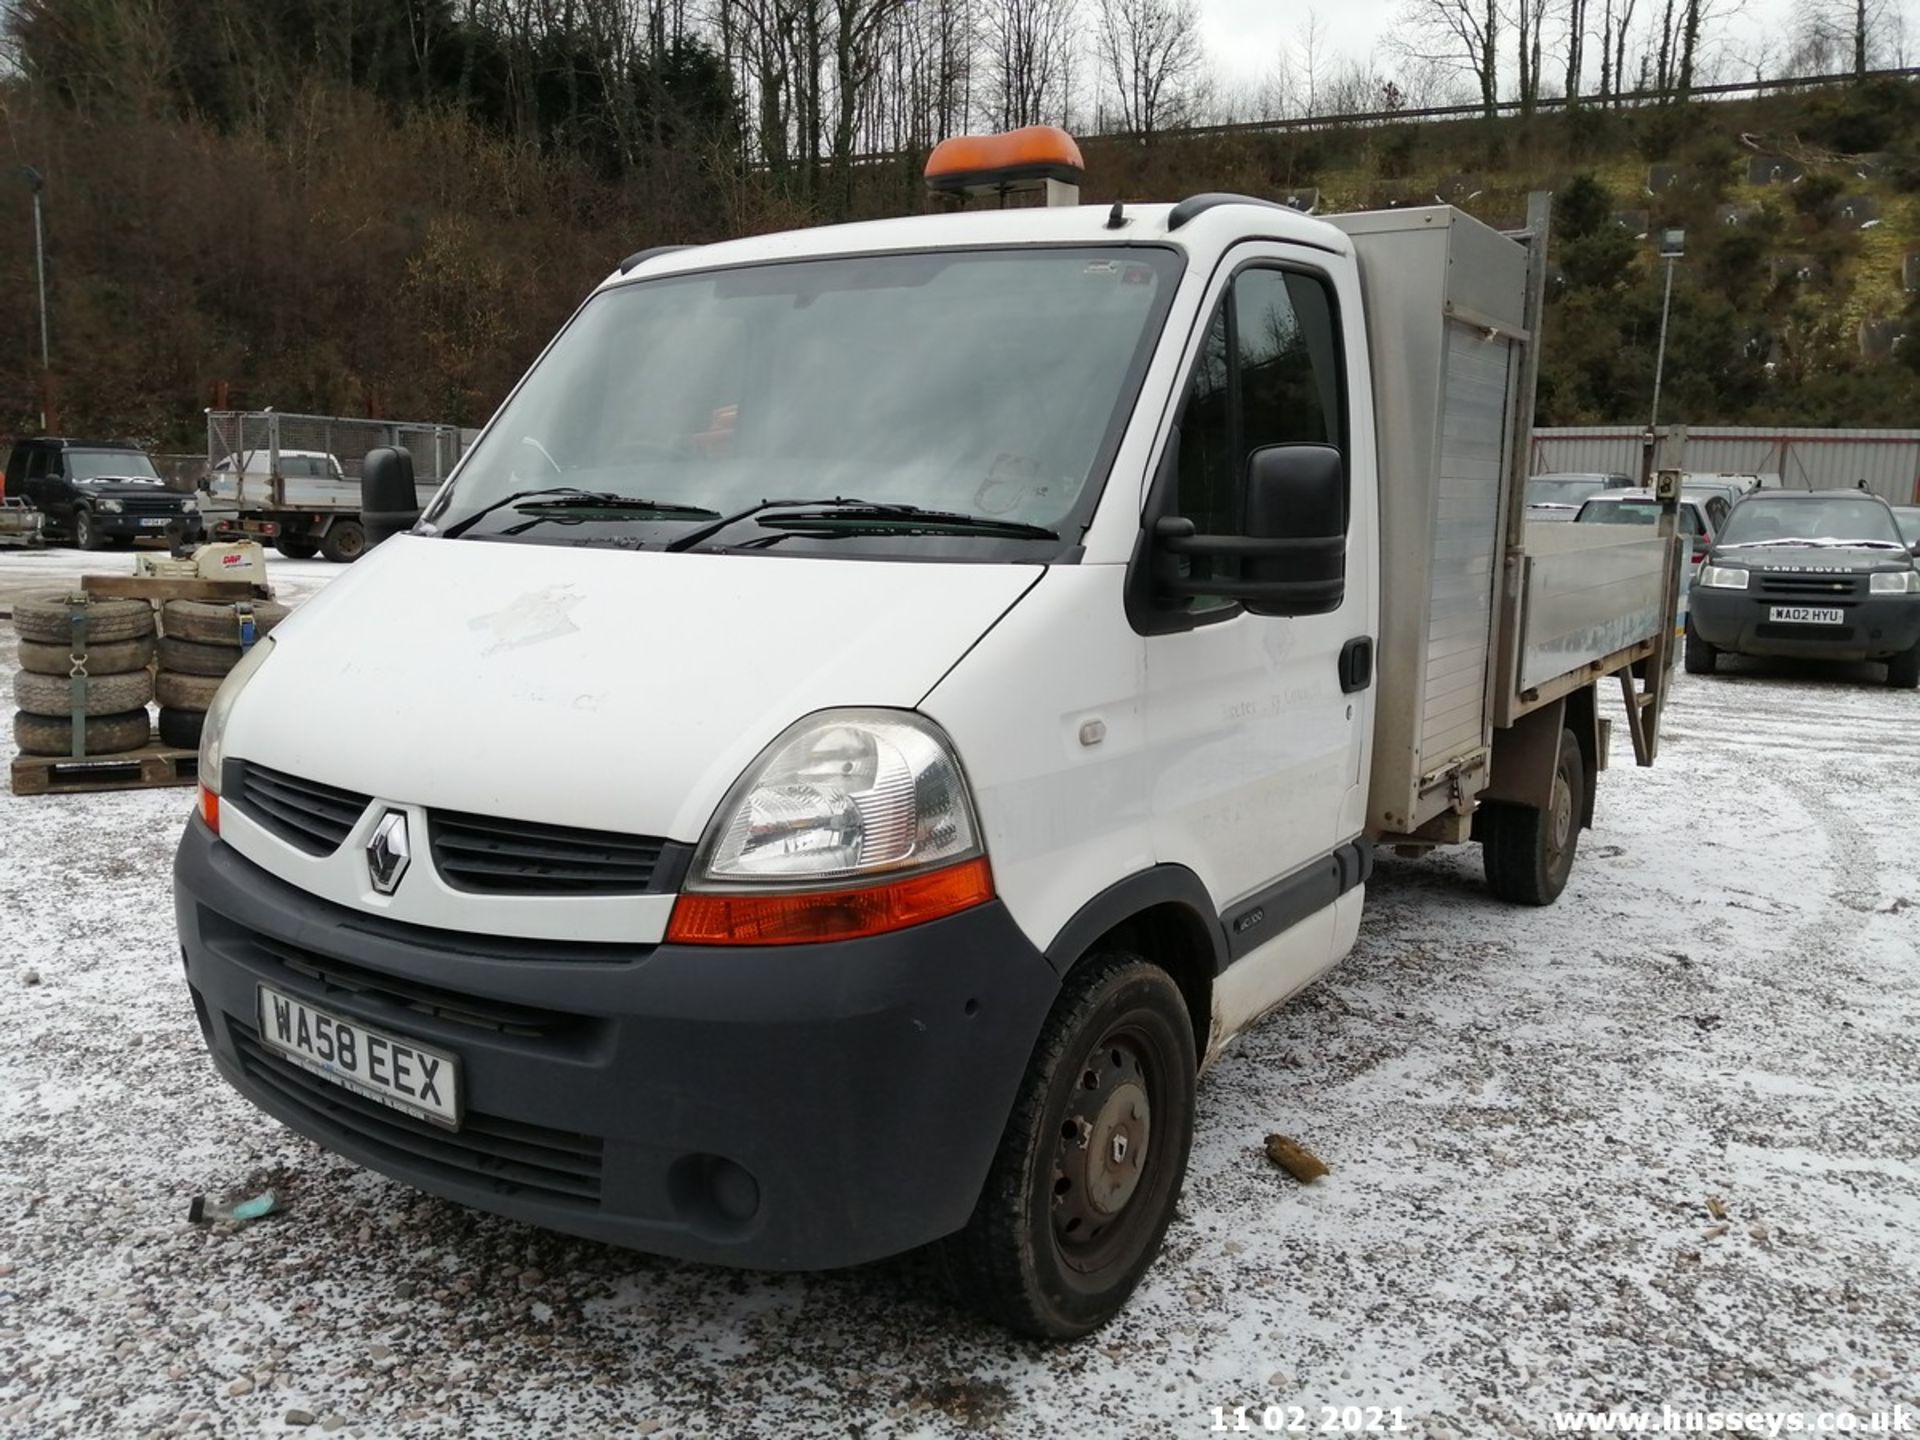 08/58 RENAULT MASTER ML35 DCI 100 - 2464cc 2dr Tipper (White, 48k) - Image 7 of 11